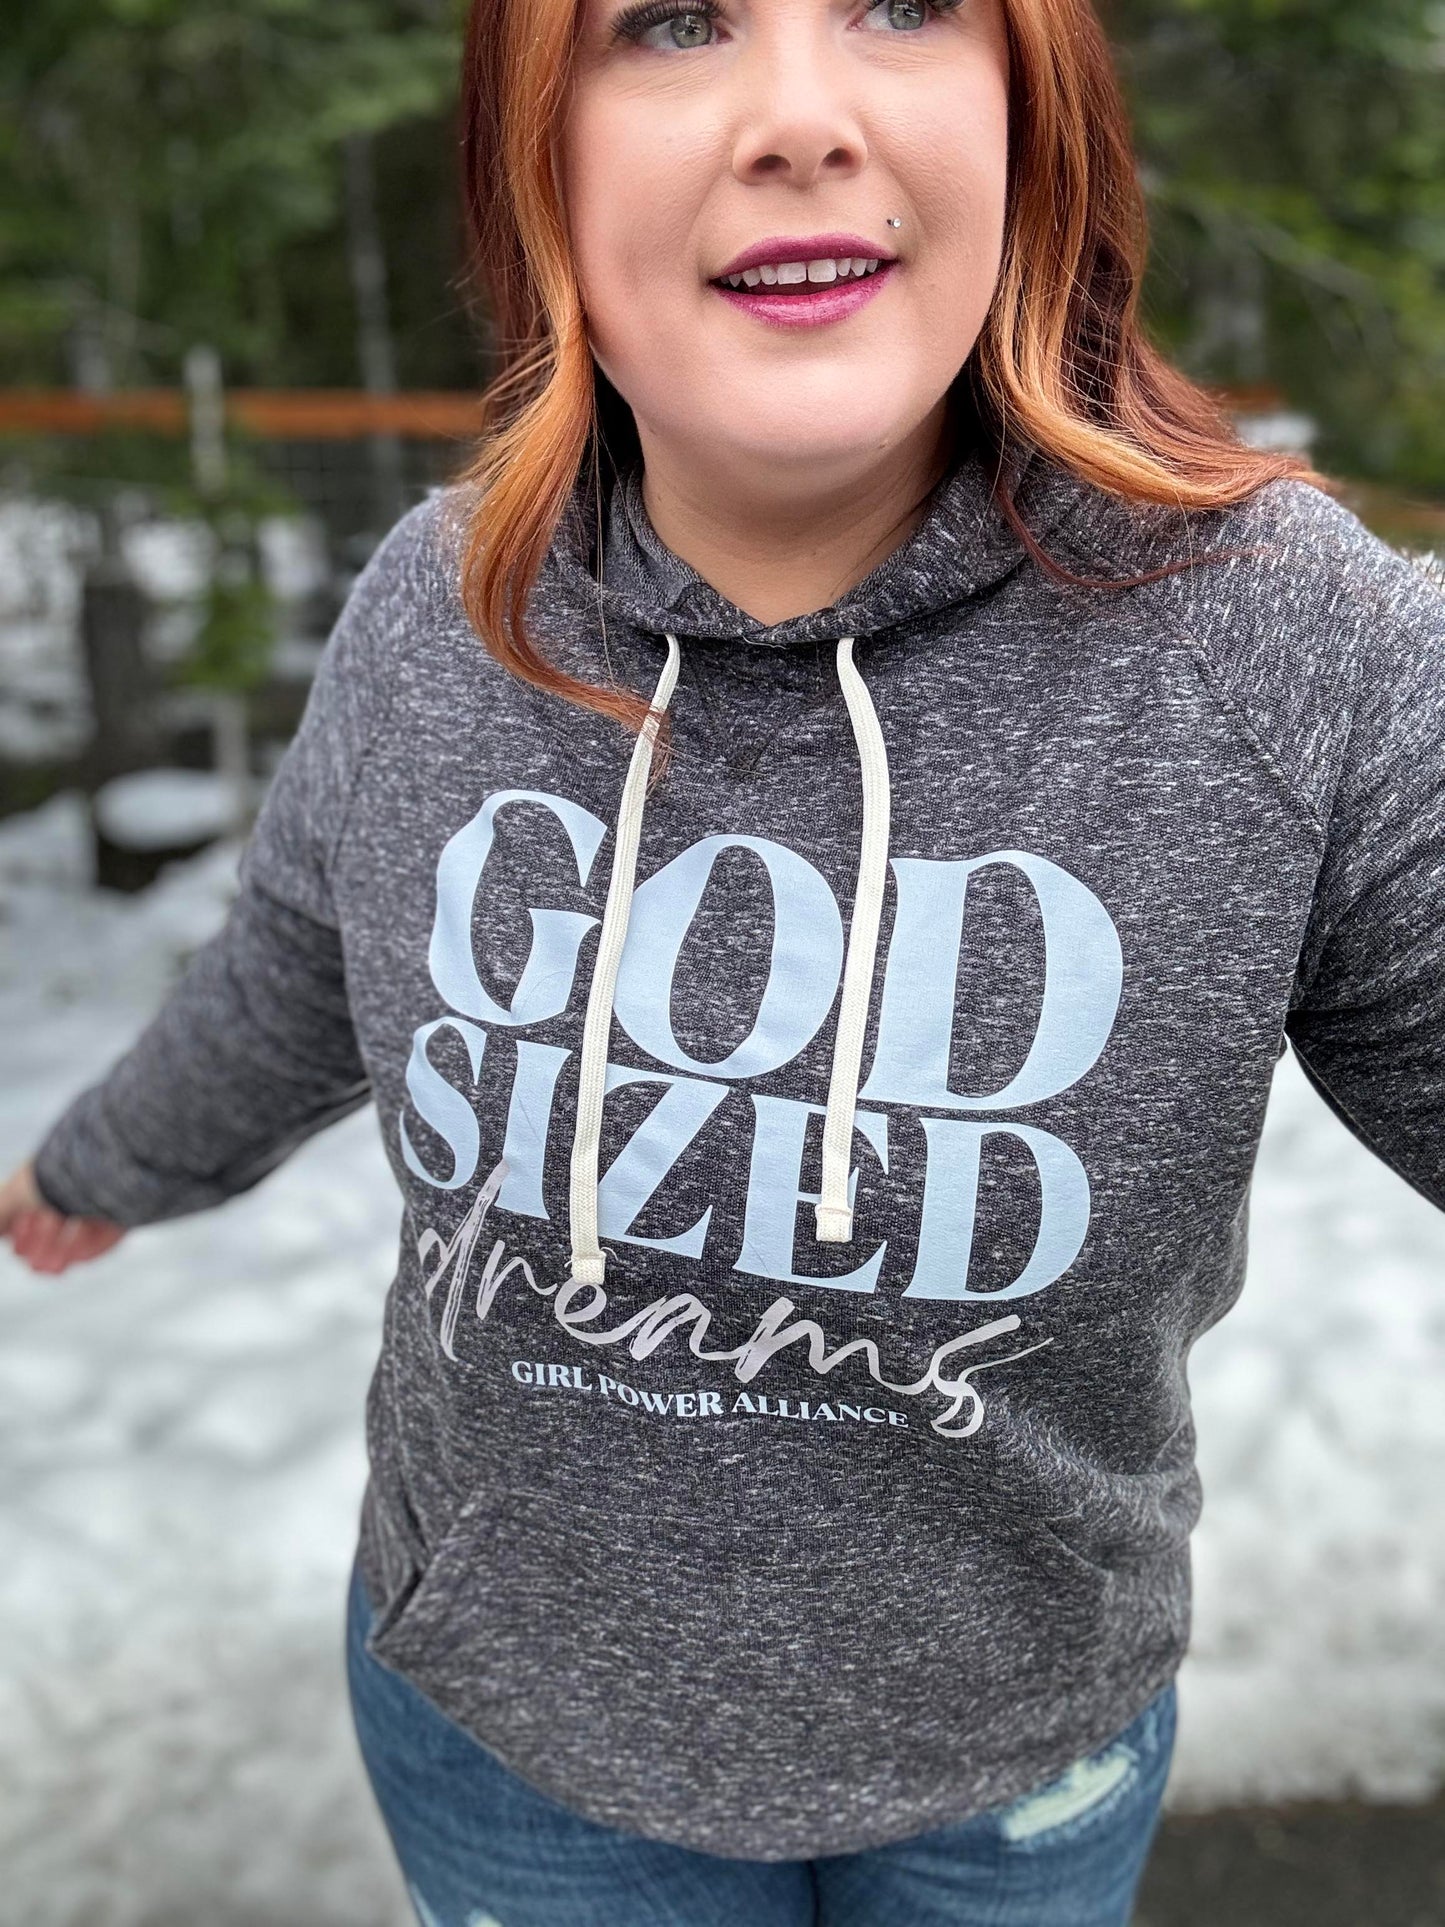 God Sized Dreams French Terry Graphic Hoodie